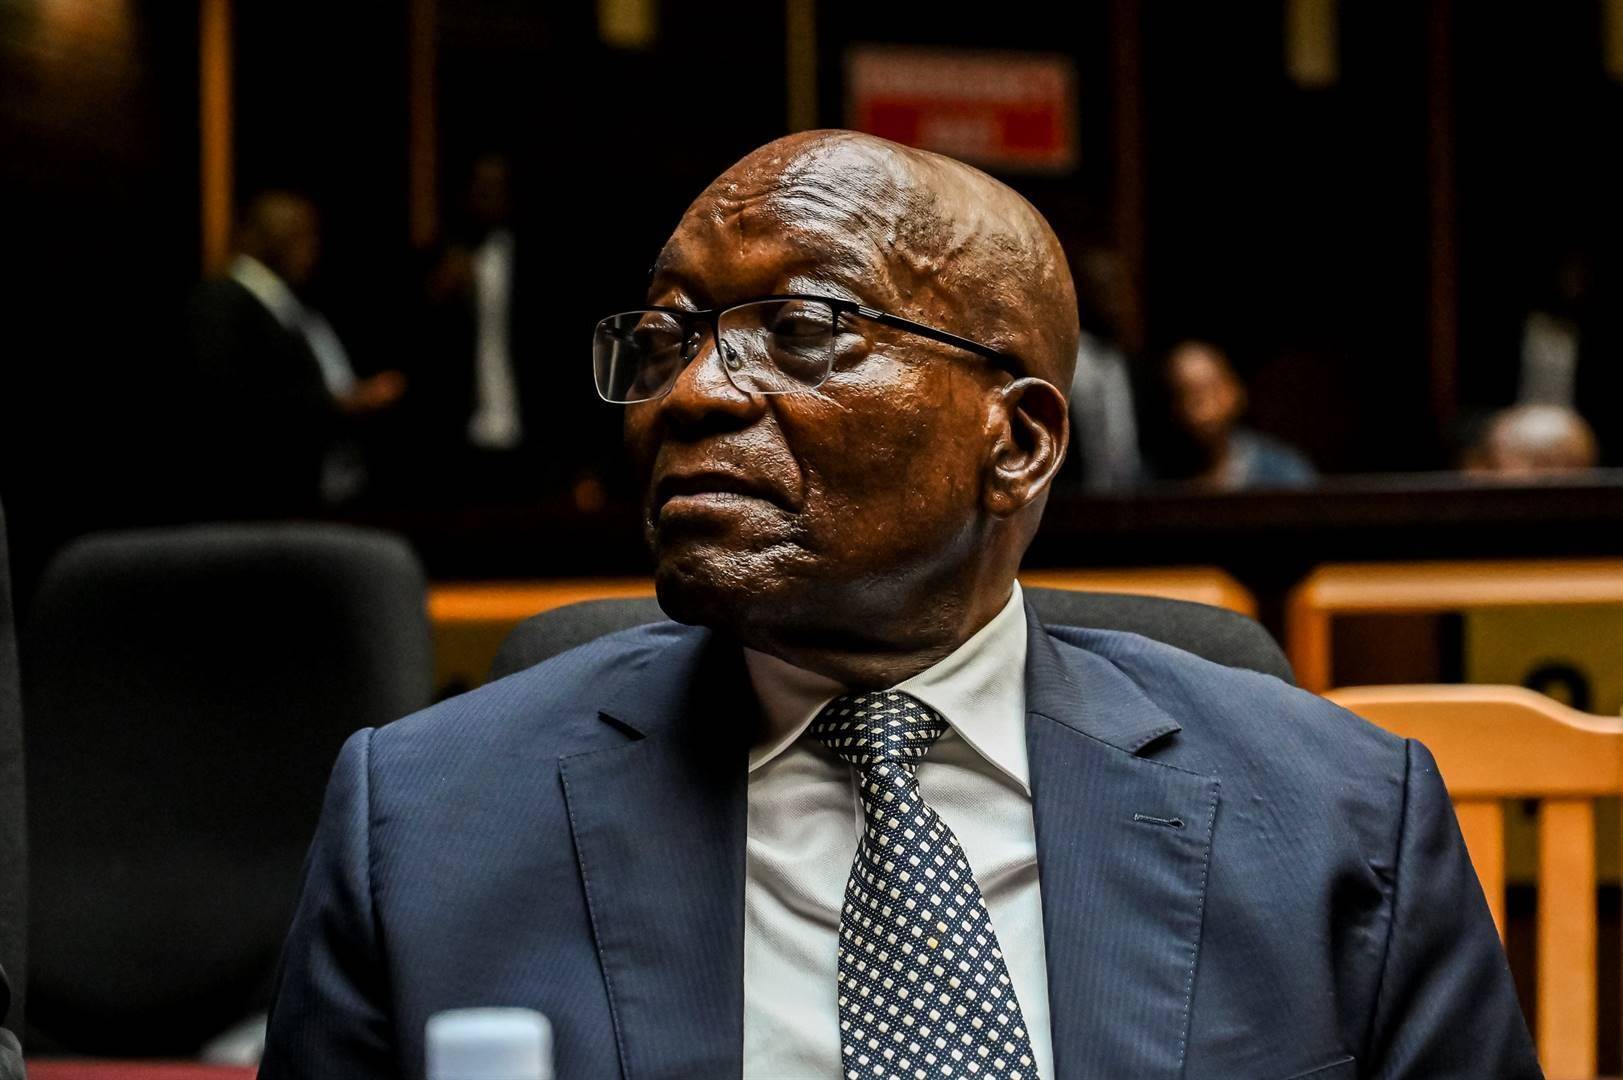 Former president Jacob Zuma seen here in court was released from prison on Friday an hour after serving, under a newly announced programme.